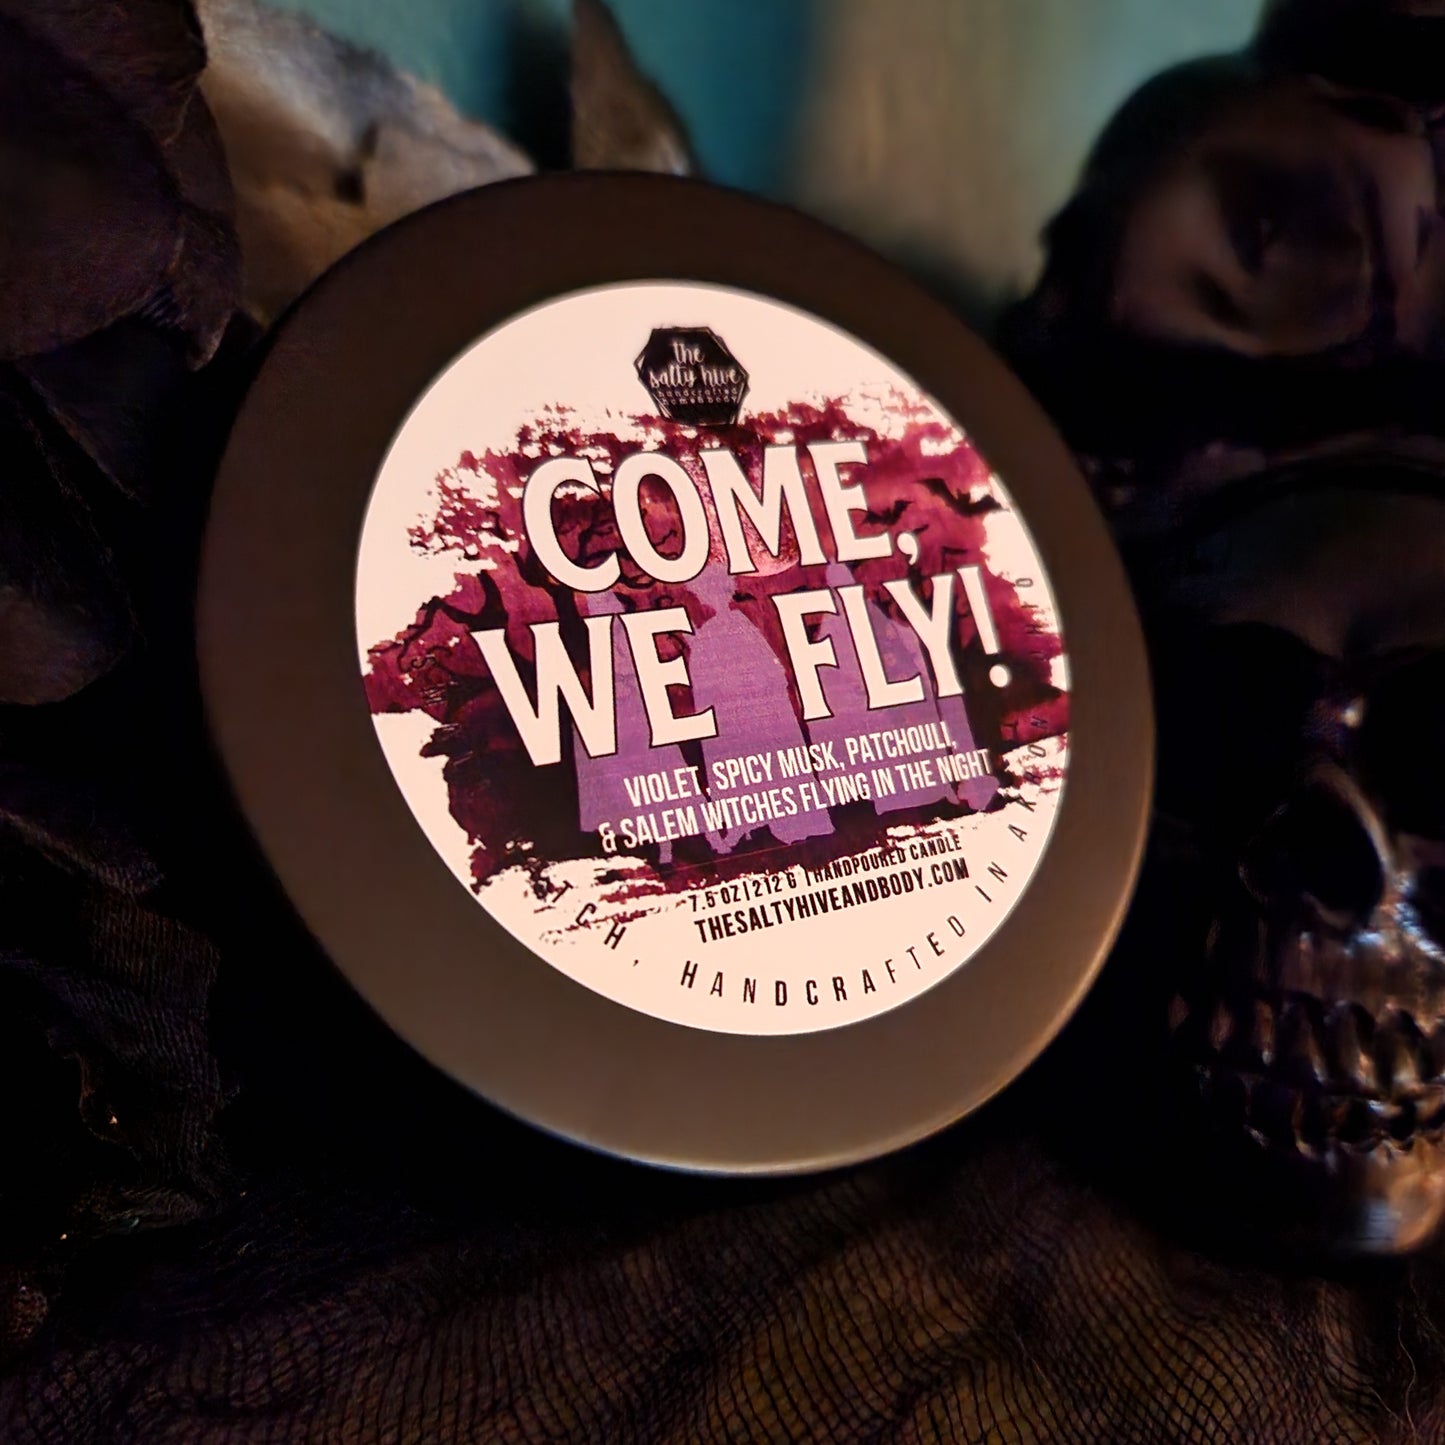 come, we fly! halloween candle - the salty hive